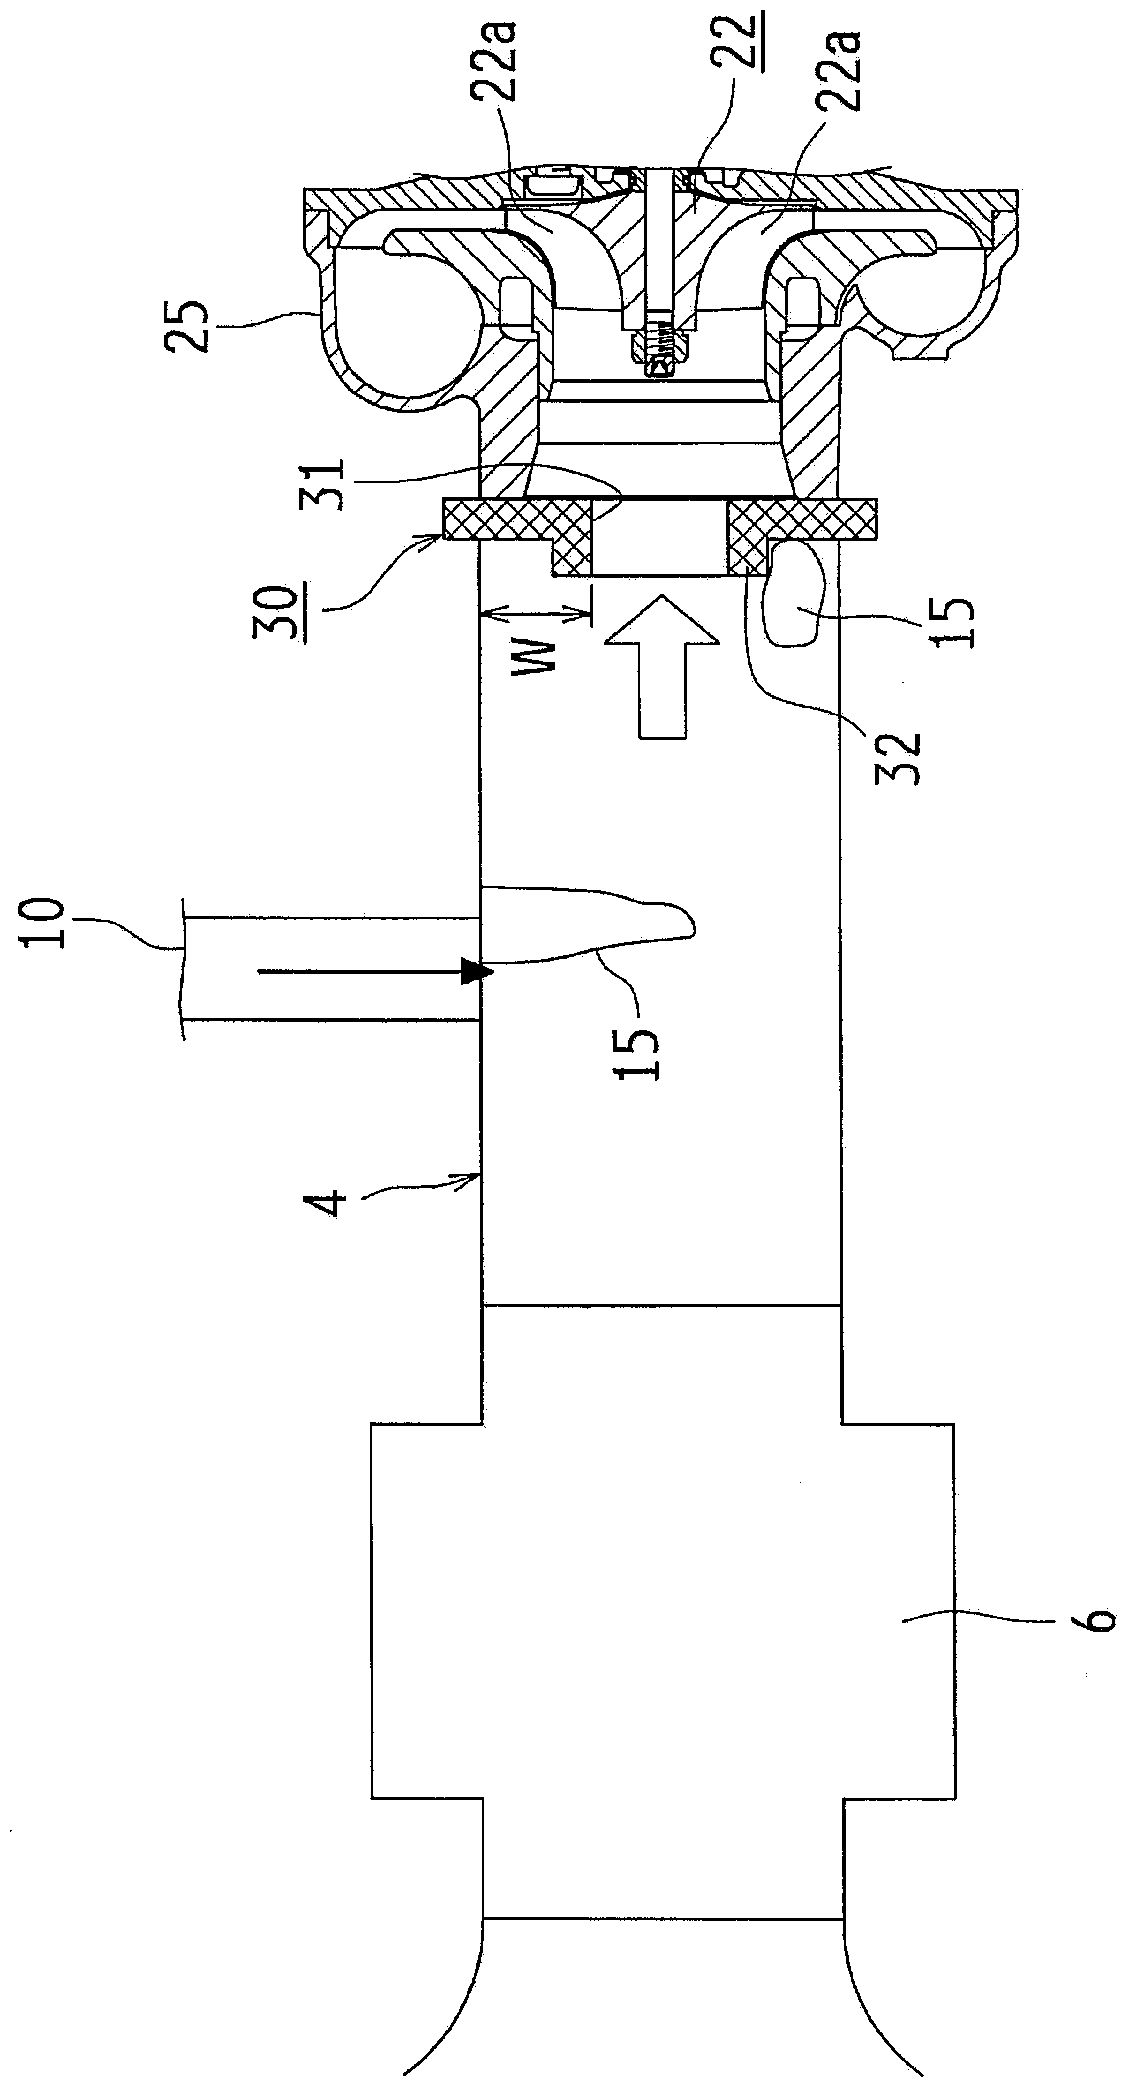 Air intake structure for internal combustion engine